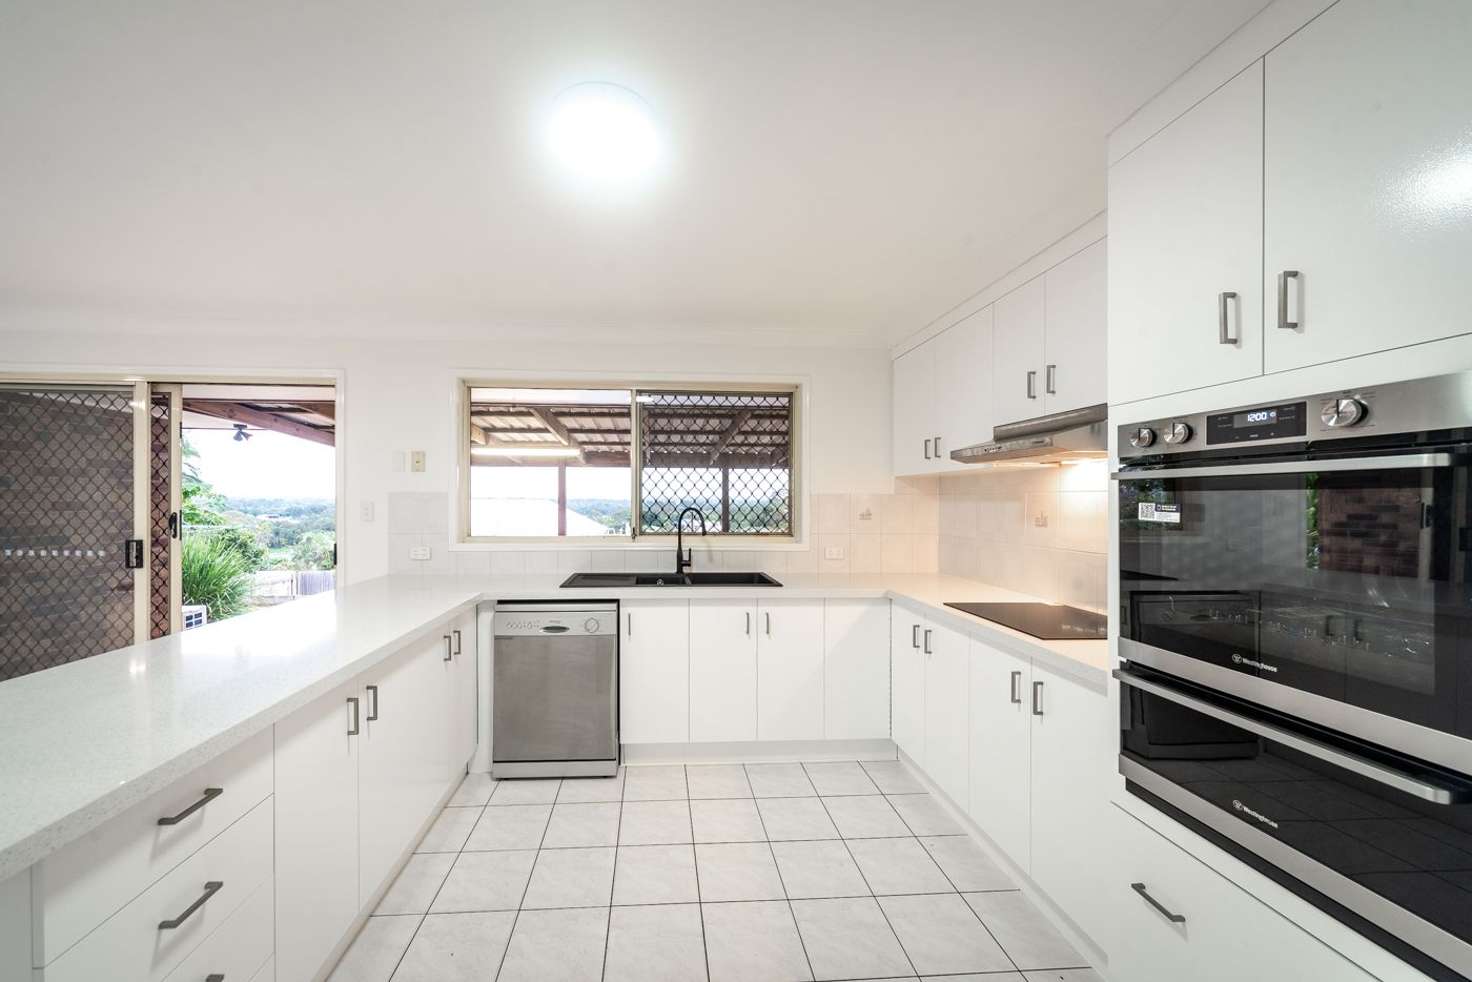 Main view of Homely house listing, 39 ANDROMEDA AVENUE, Tanah Merah QLD 4128